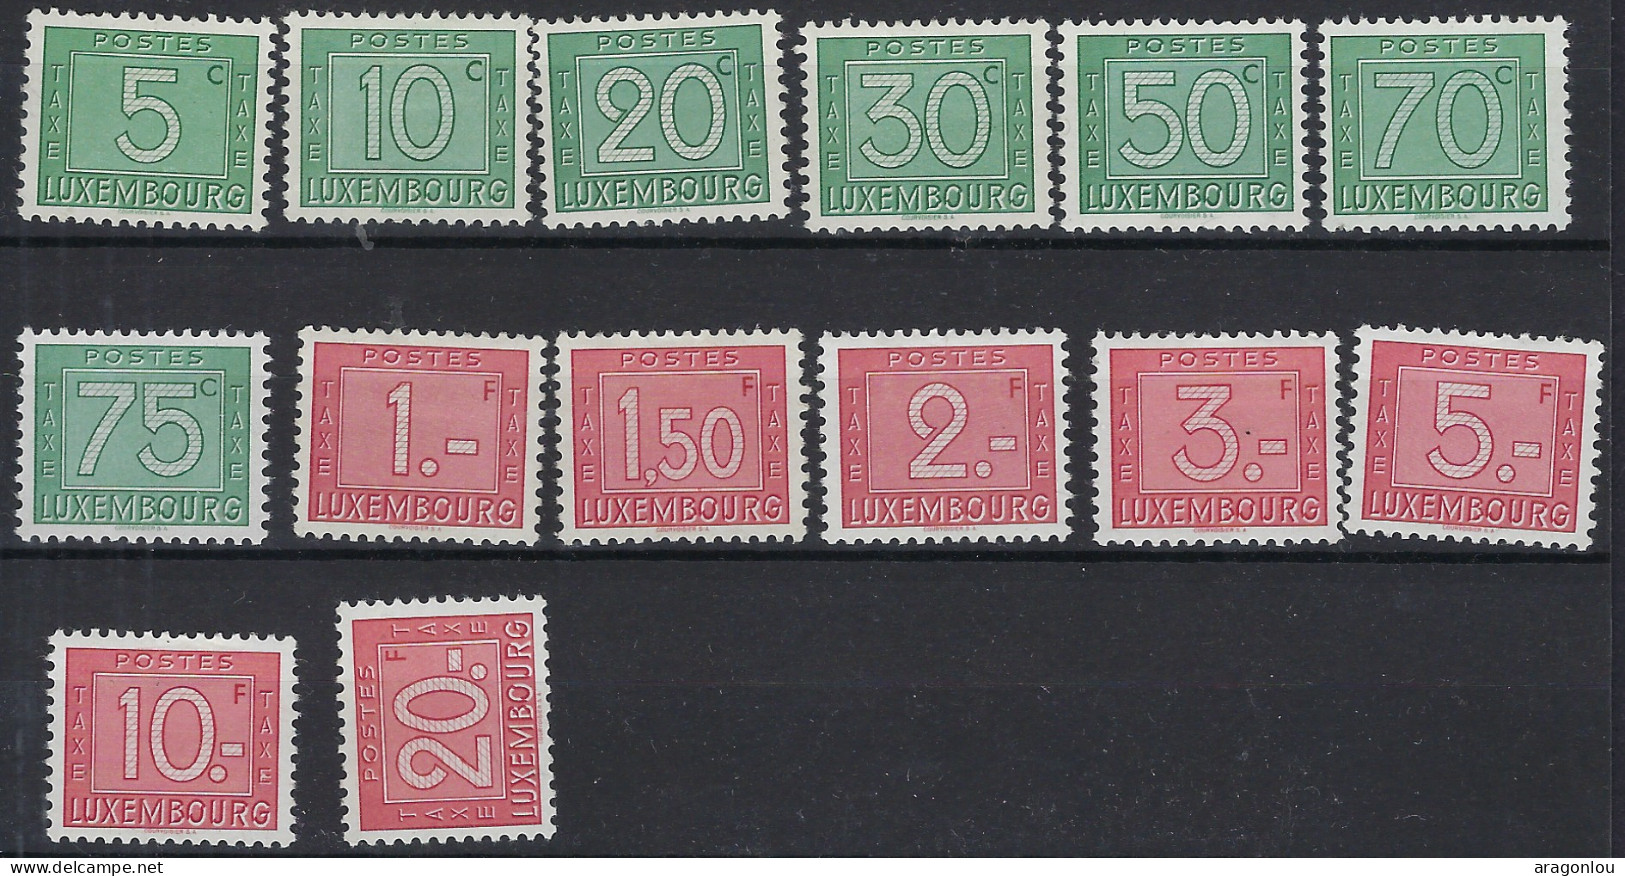 Luxembourg - Luxemburg - Timbres  1946/47    Chiffres     Série  * - Gebruikt